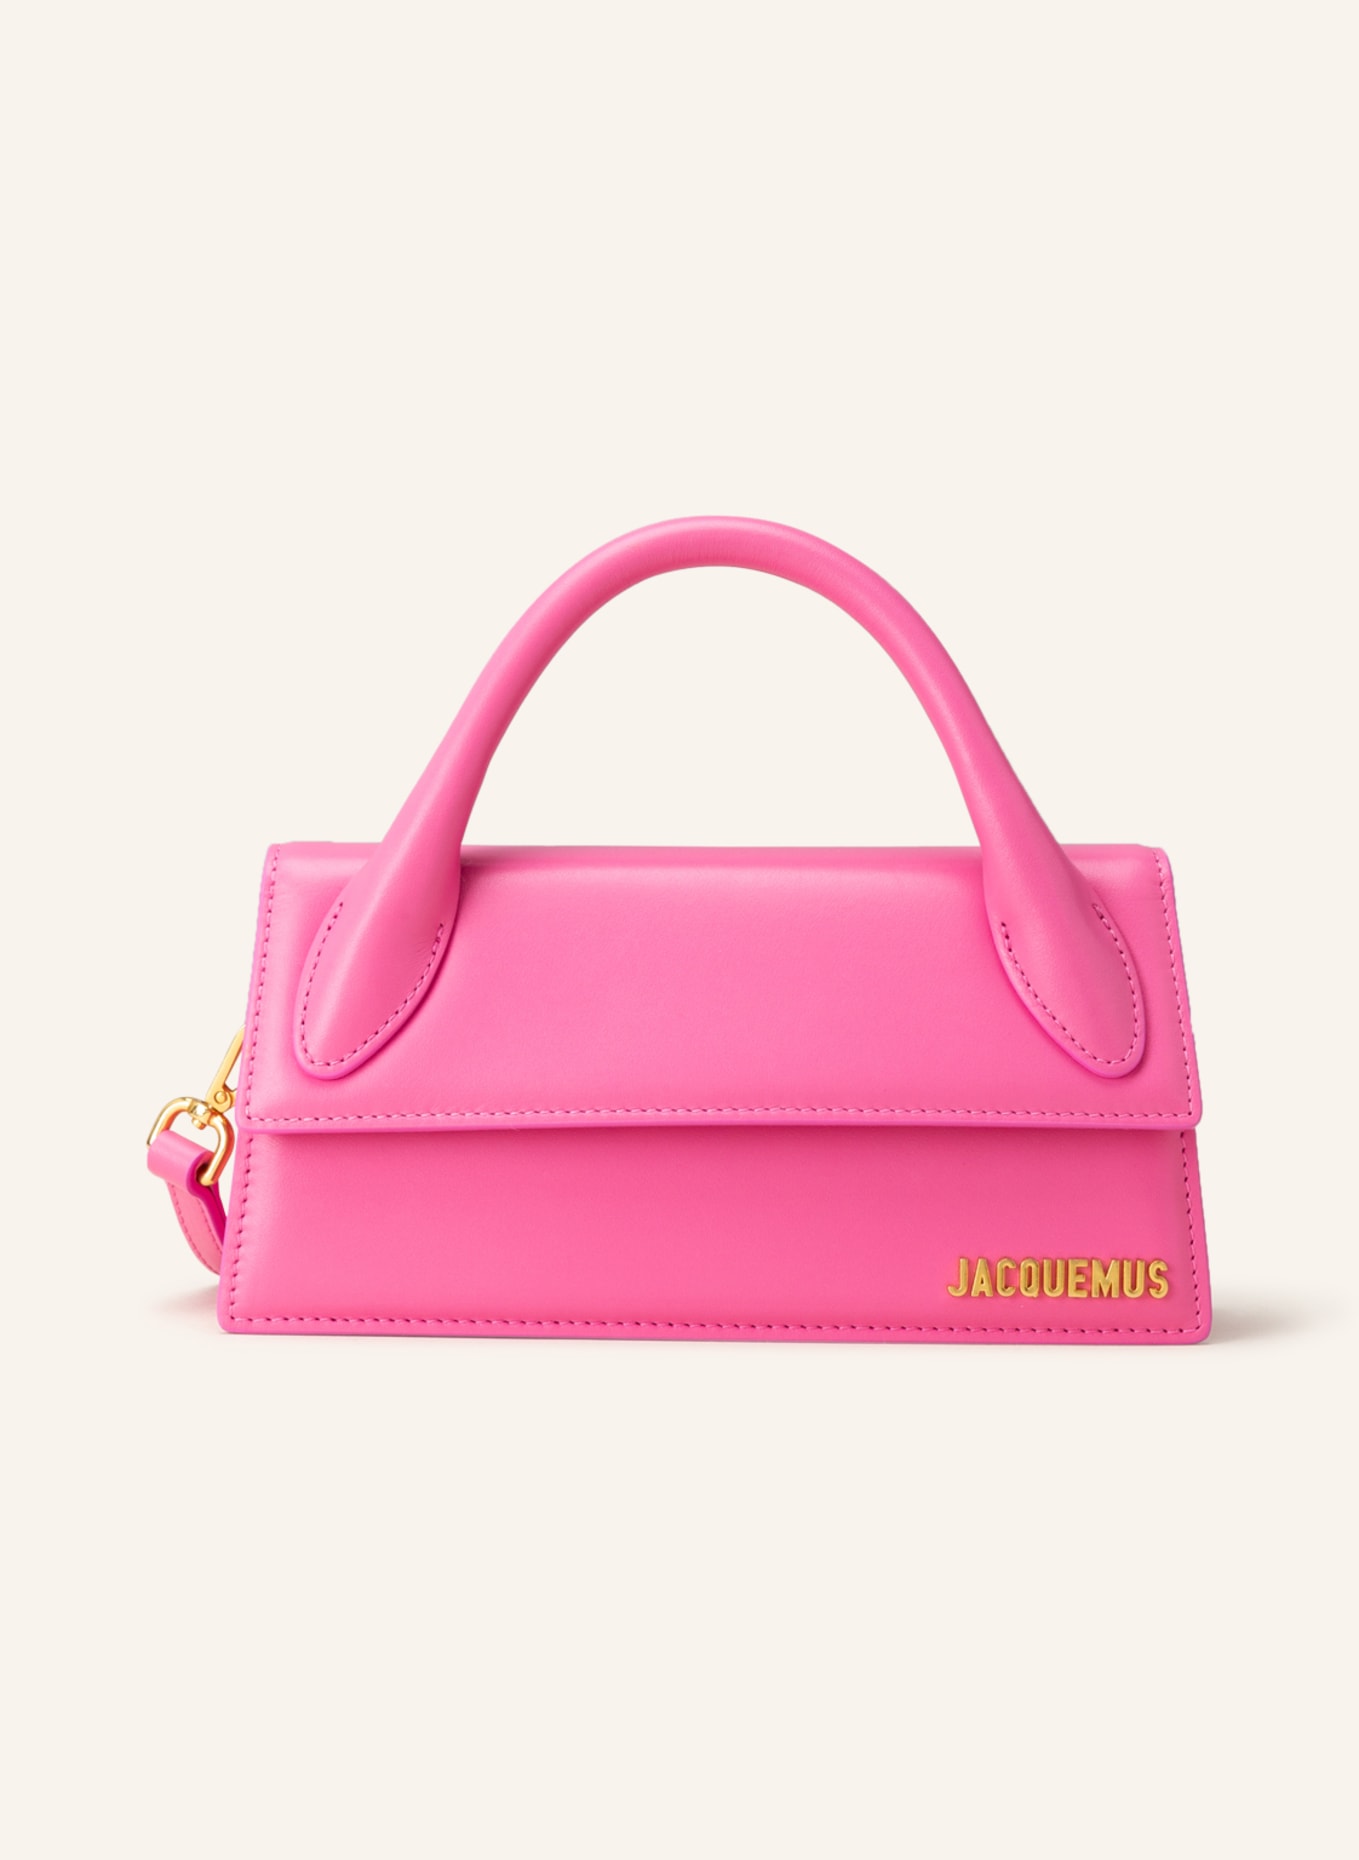 JACQUEMUS Handtasche LE CHIQUITO LONG , Farbe: PINK (Bild 1)